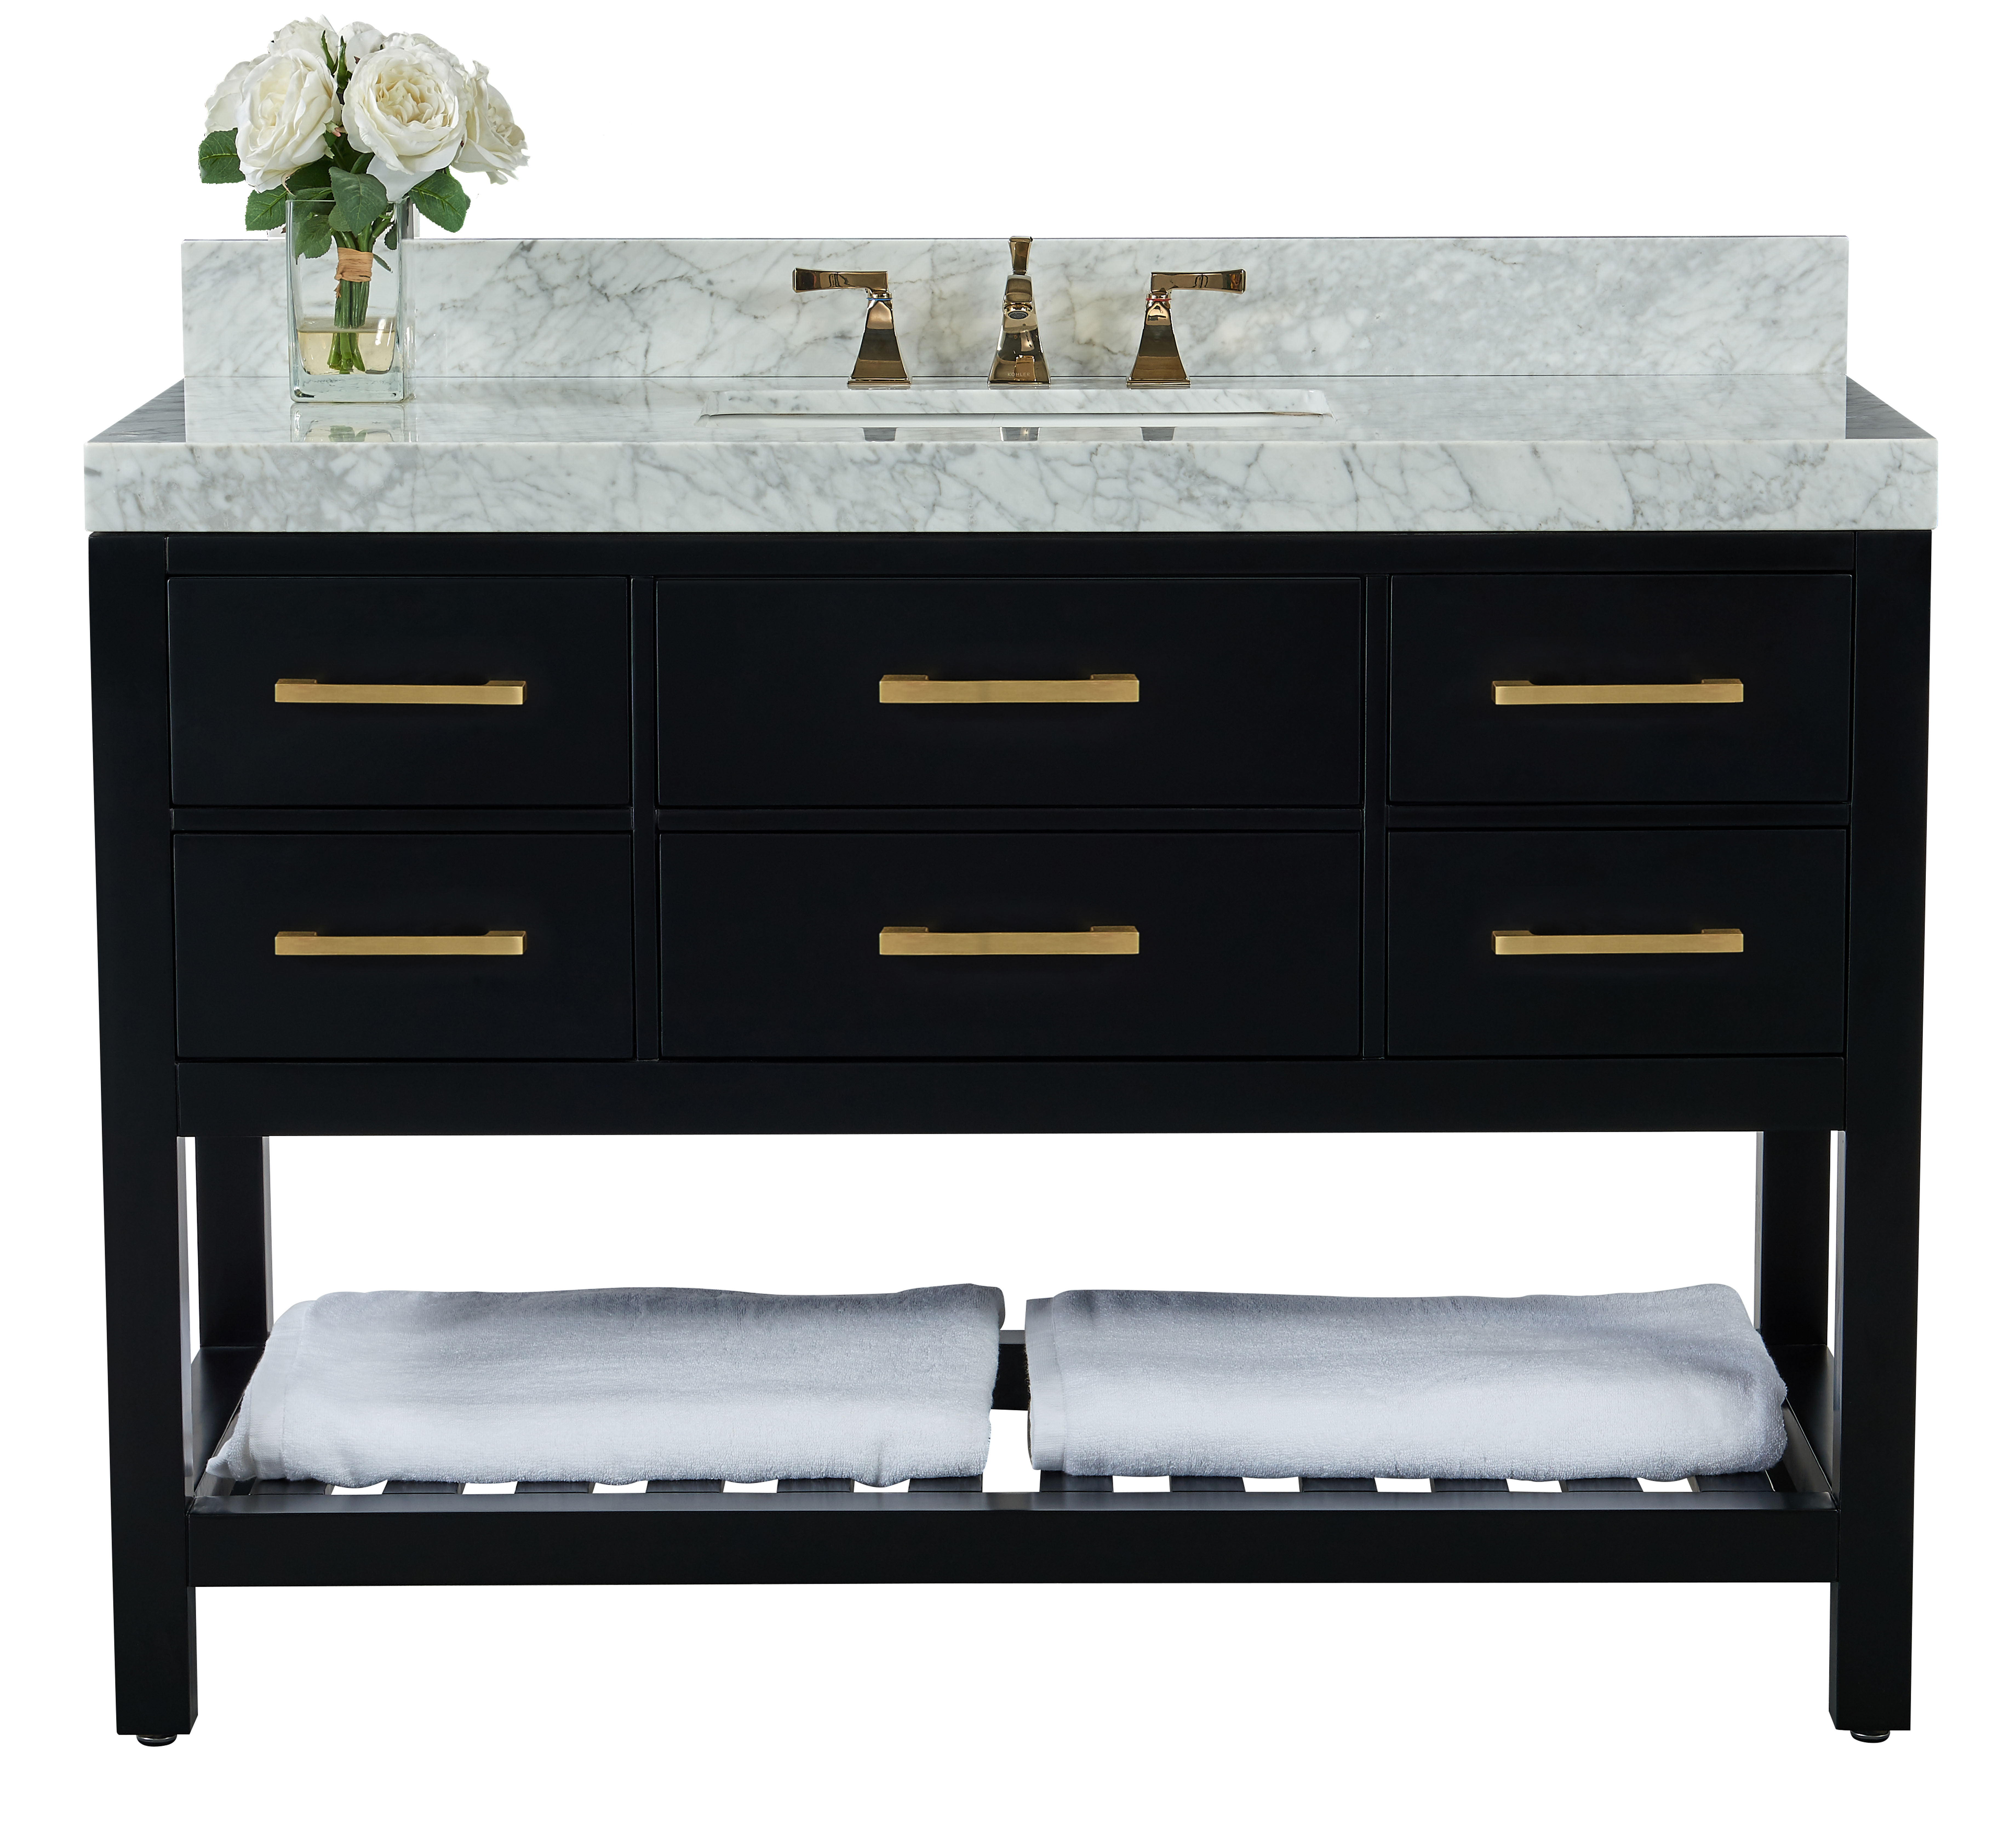 48" Single Sink Bath Vanity Set in Black Onyx with Italian Carrara White Marble Vanity top and White Undermount Basin with Gold Hardware